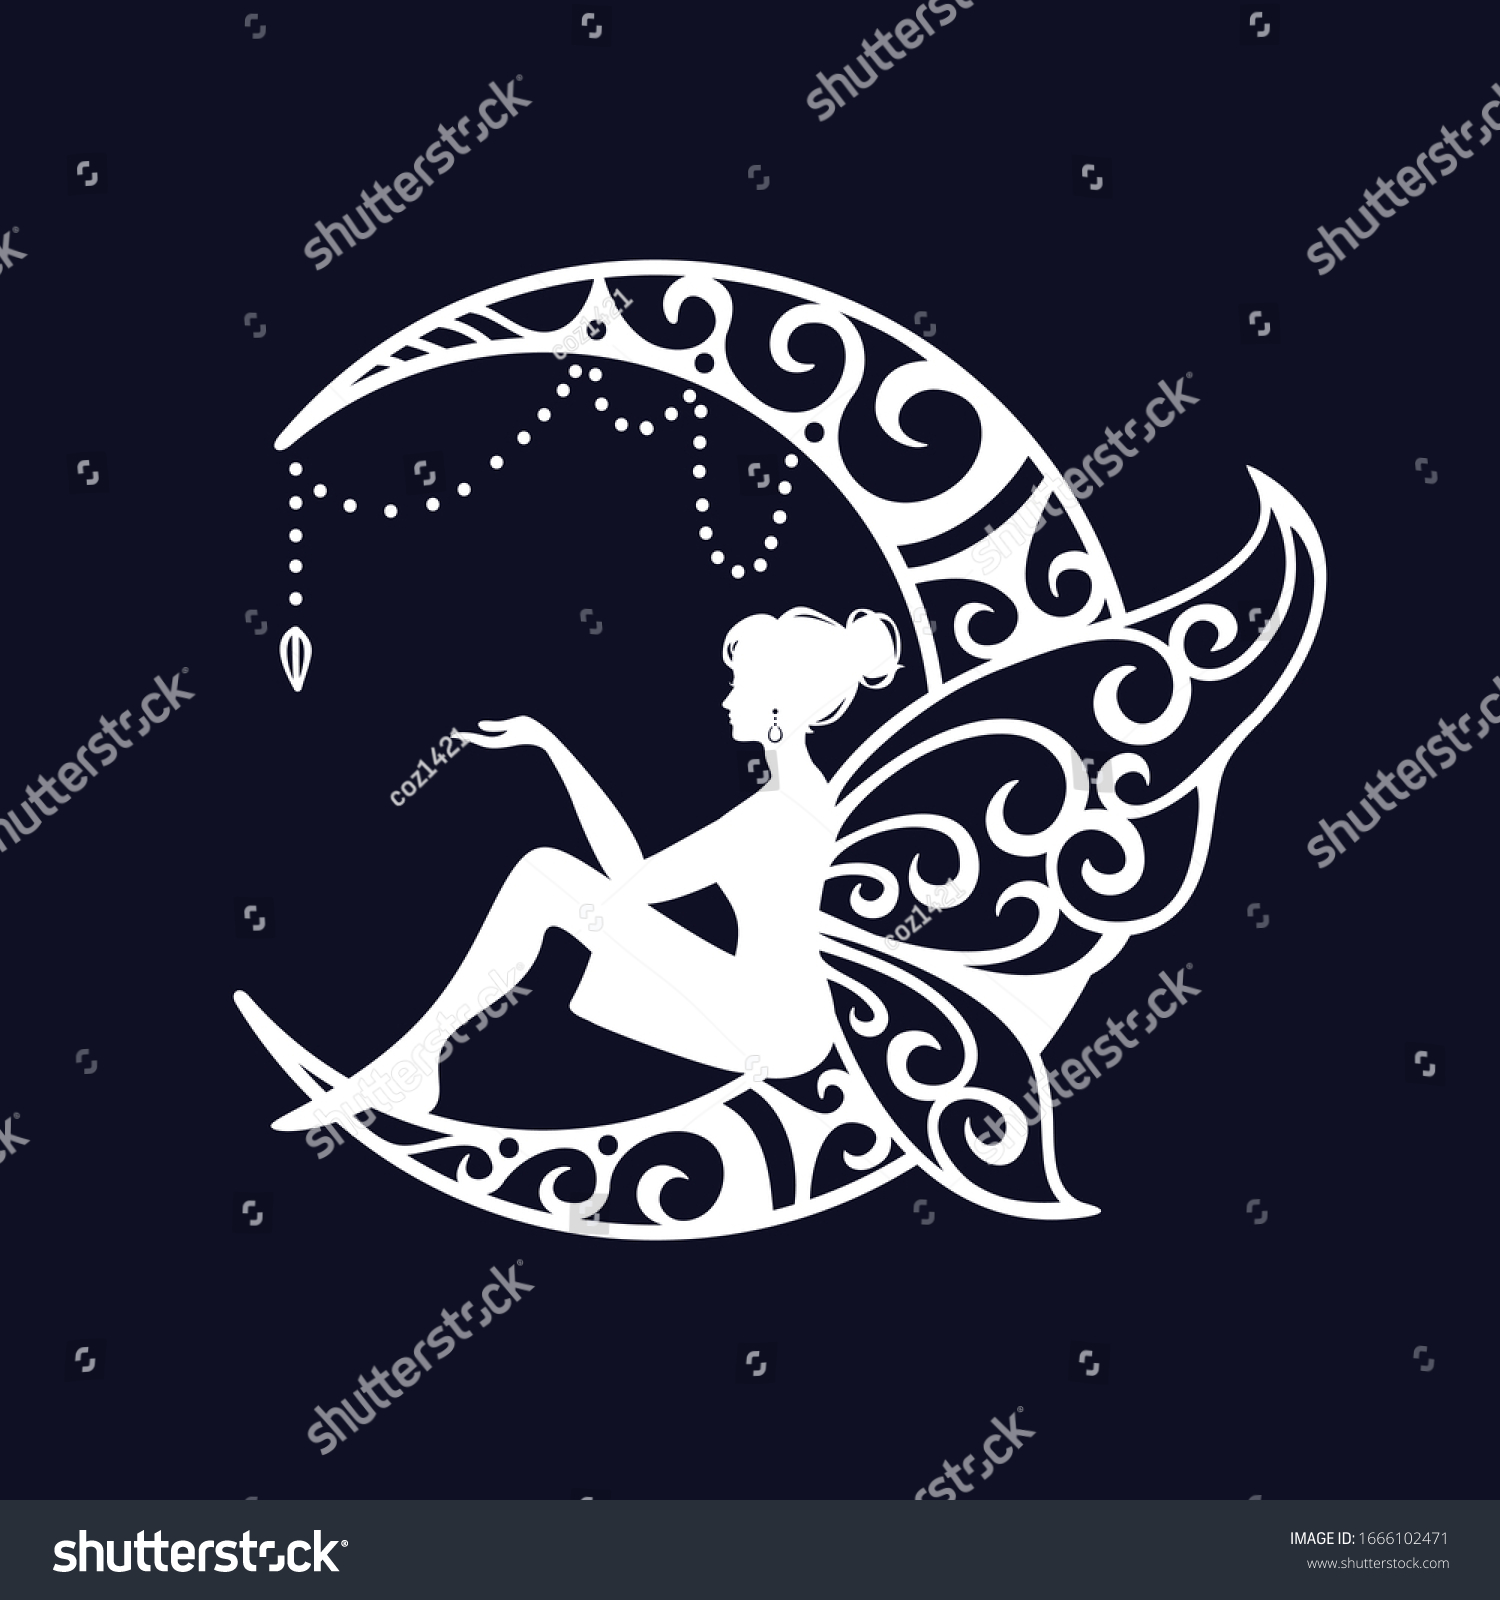 Download Fairy Crescent Moon Cut File Illustration Stock Vector Royalty Free 1666102471